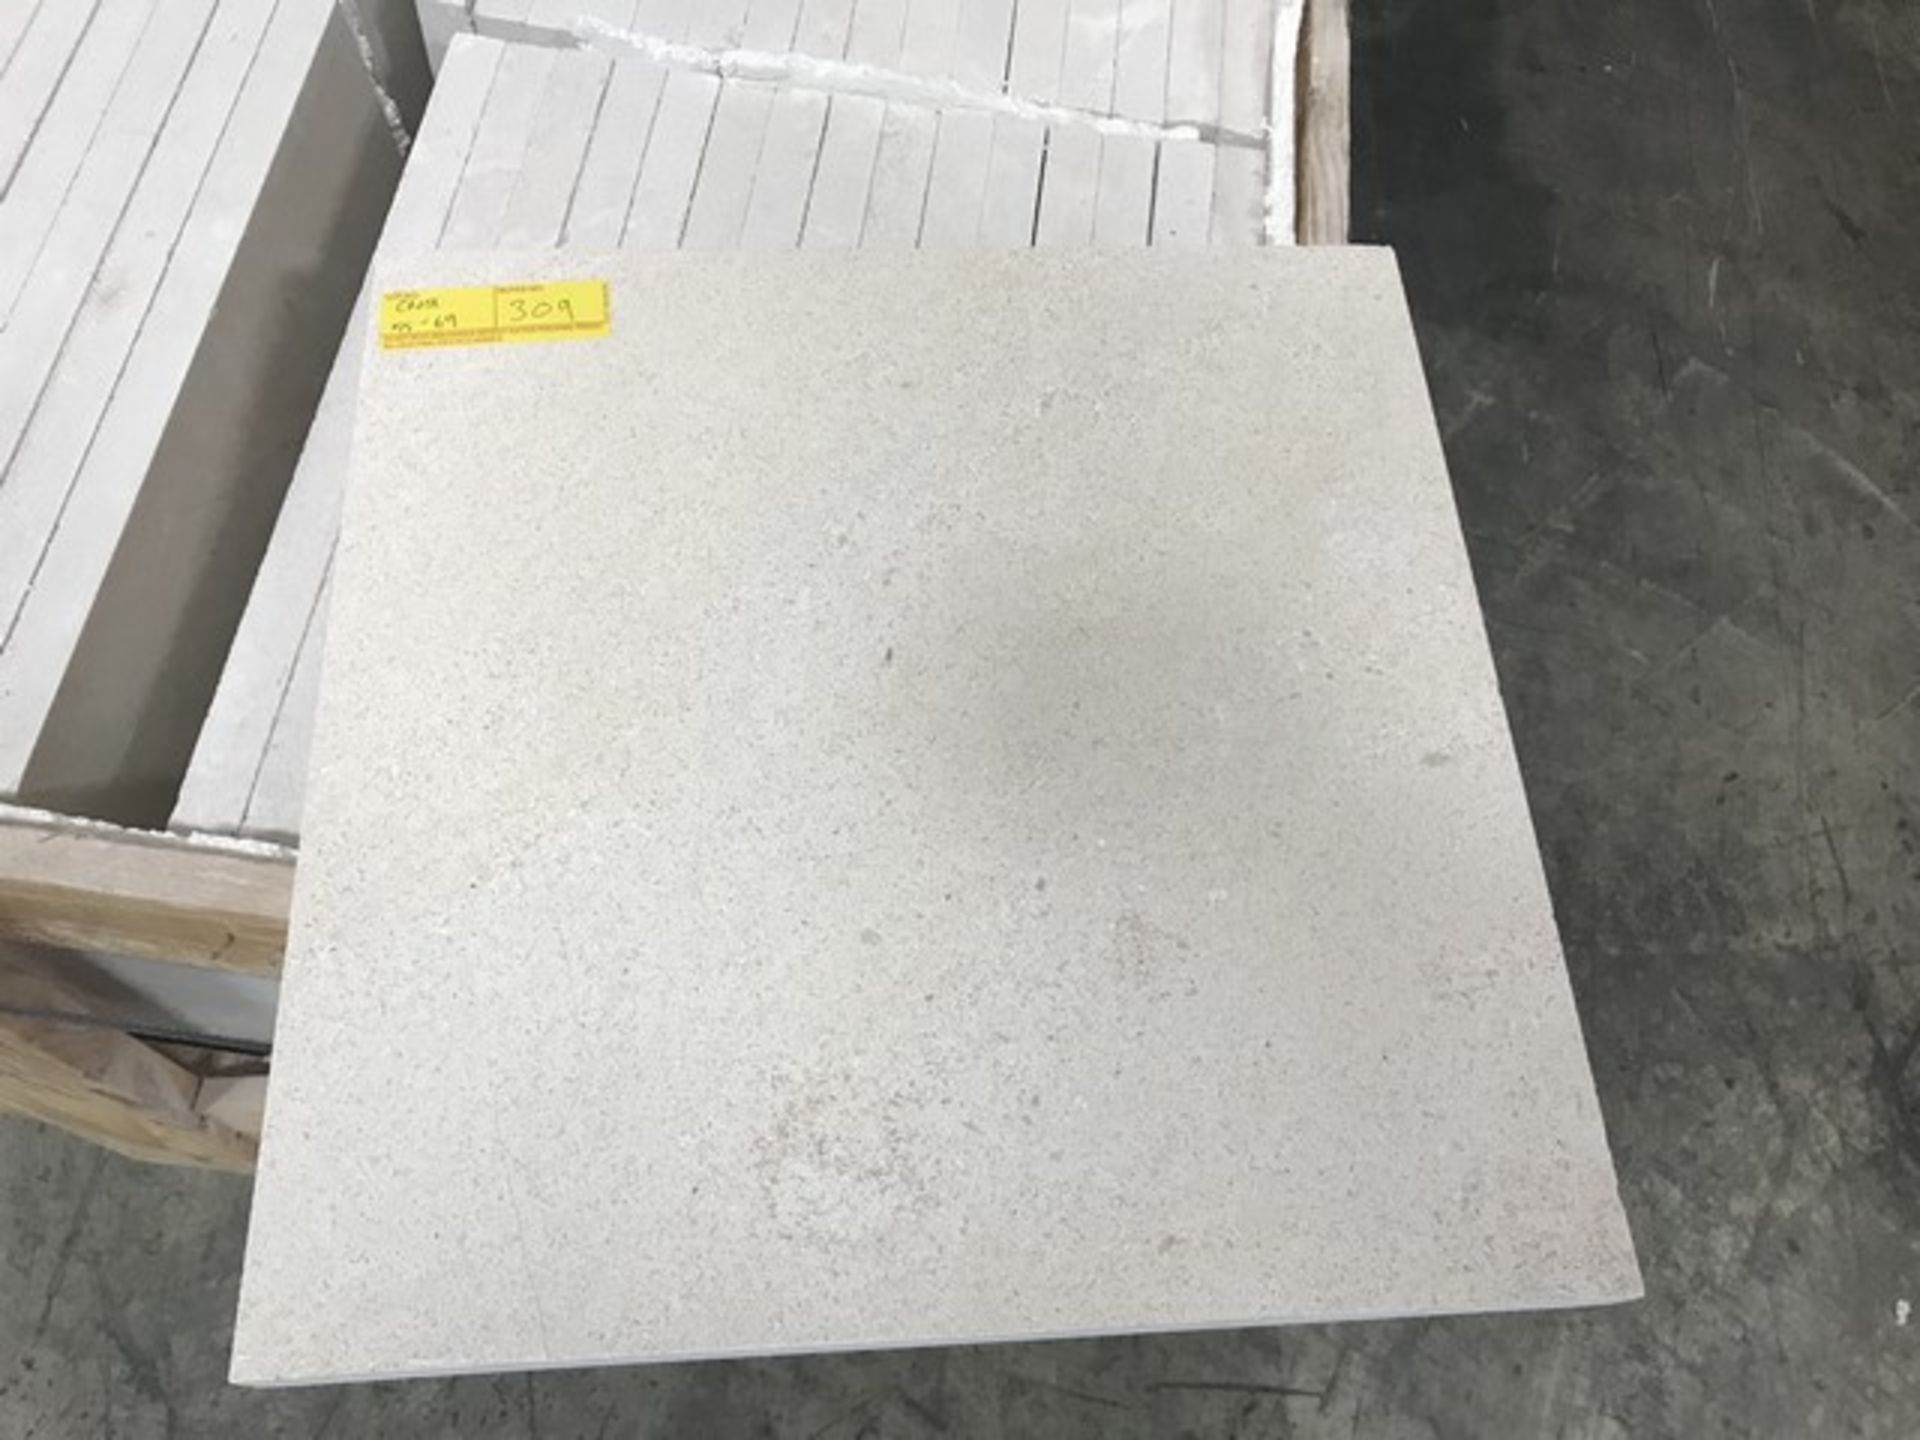 SQ.FT. - HONED CROSS CUT MARBLE - 16'' x 16'' x 1'' - 76 PIECES / 135.28 SQ.FT. (CRATE #59)